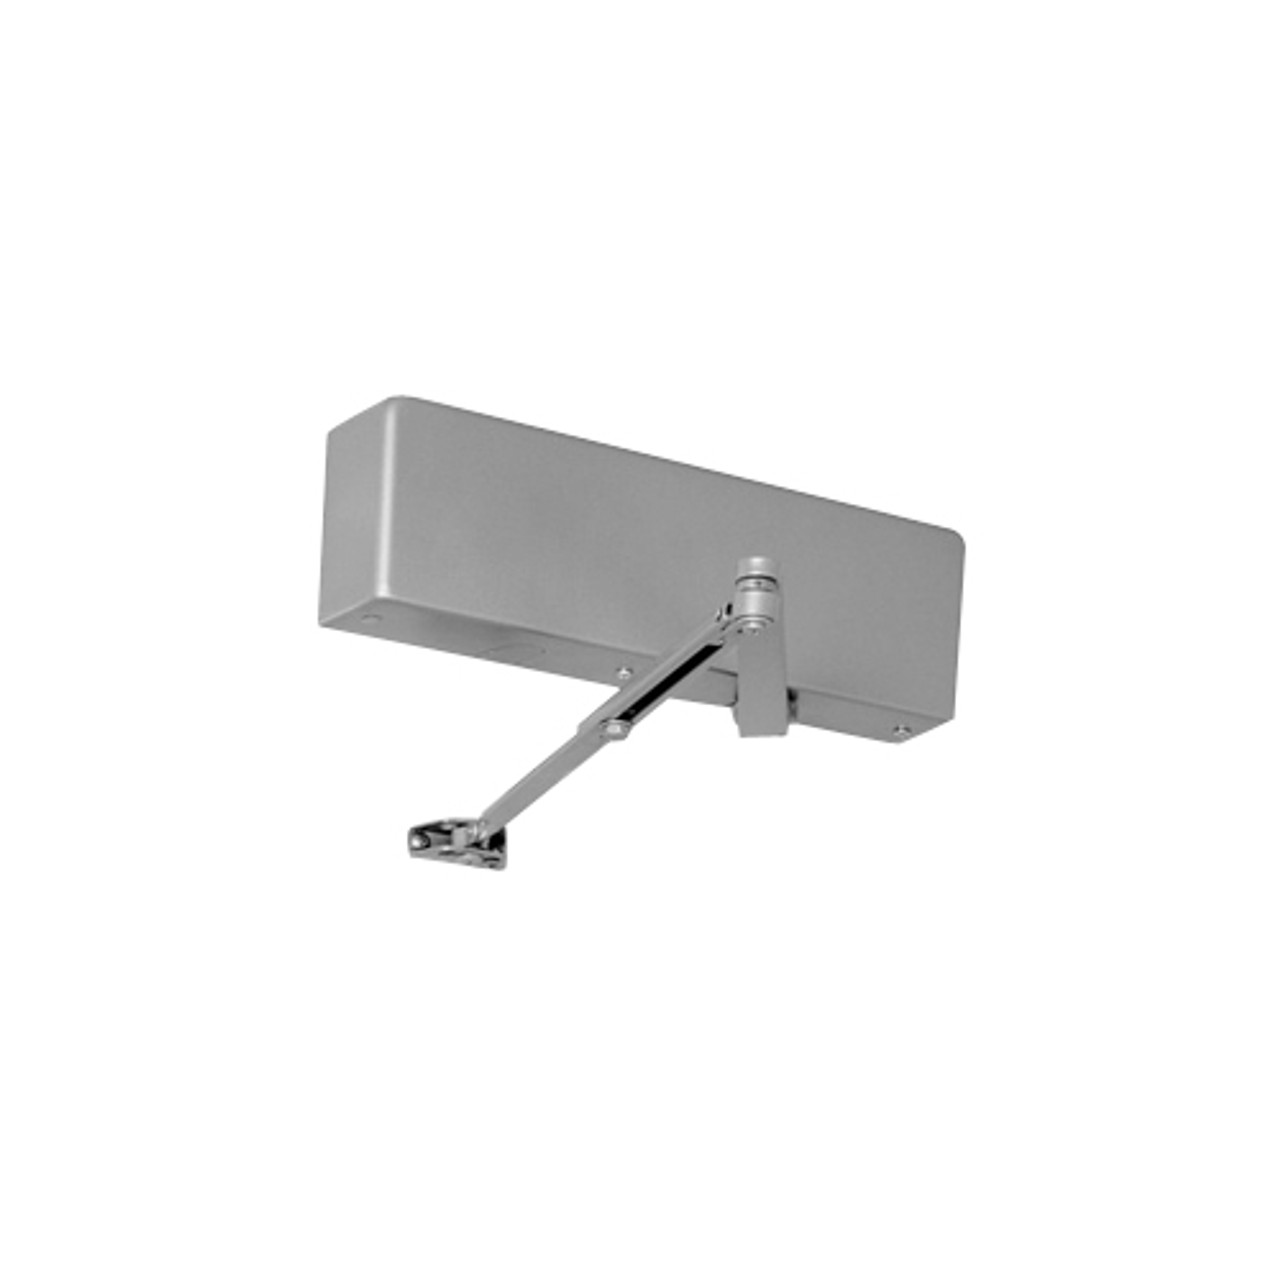 JL7500-689 Norton 7500 Series Non-Hold Open Institutional Door Closer with Top Jamb Only Reveals 2-3/4 to 7 inch to 180 Degree in Aluminum Finish